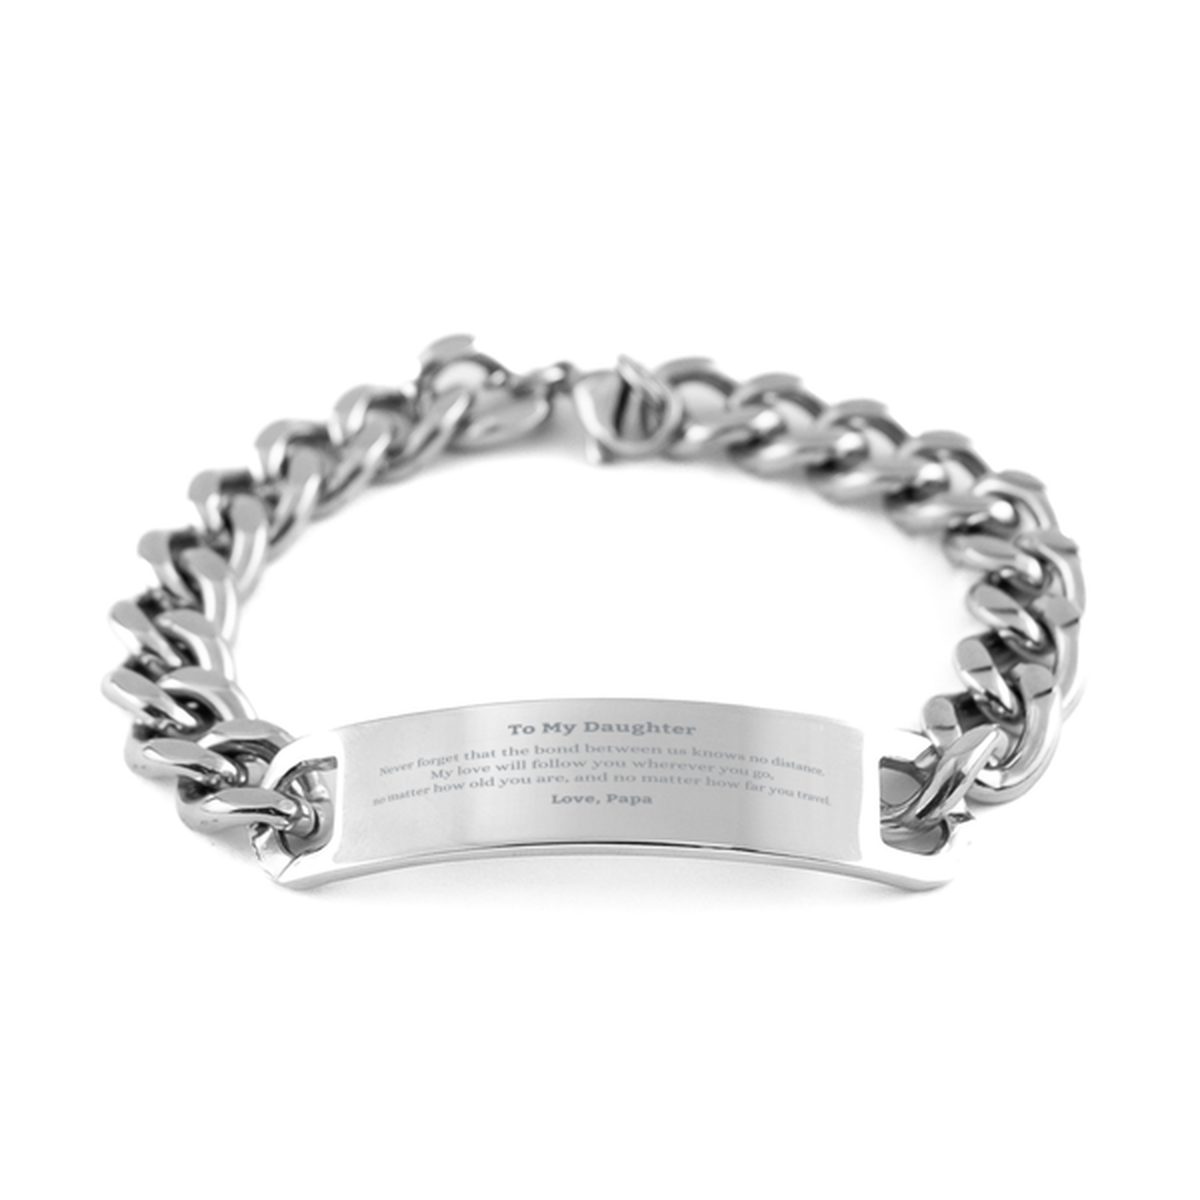 Daughter Birthday Gifts from Papa, Adjustable Cuban Chain Stainless Steel Bracelet for Daughter Christmas Graduation Unique Gifts Daughter Never forget that the bond between us knows no distance. Love, Papa